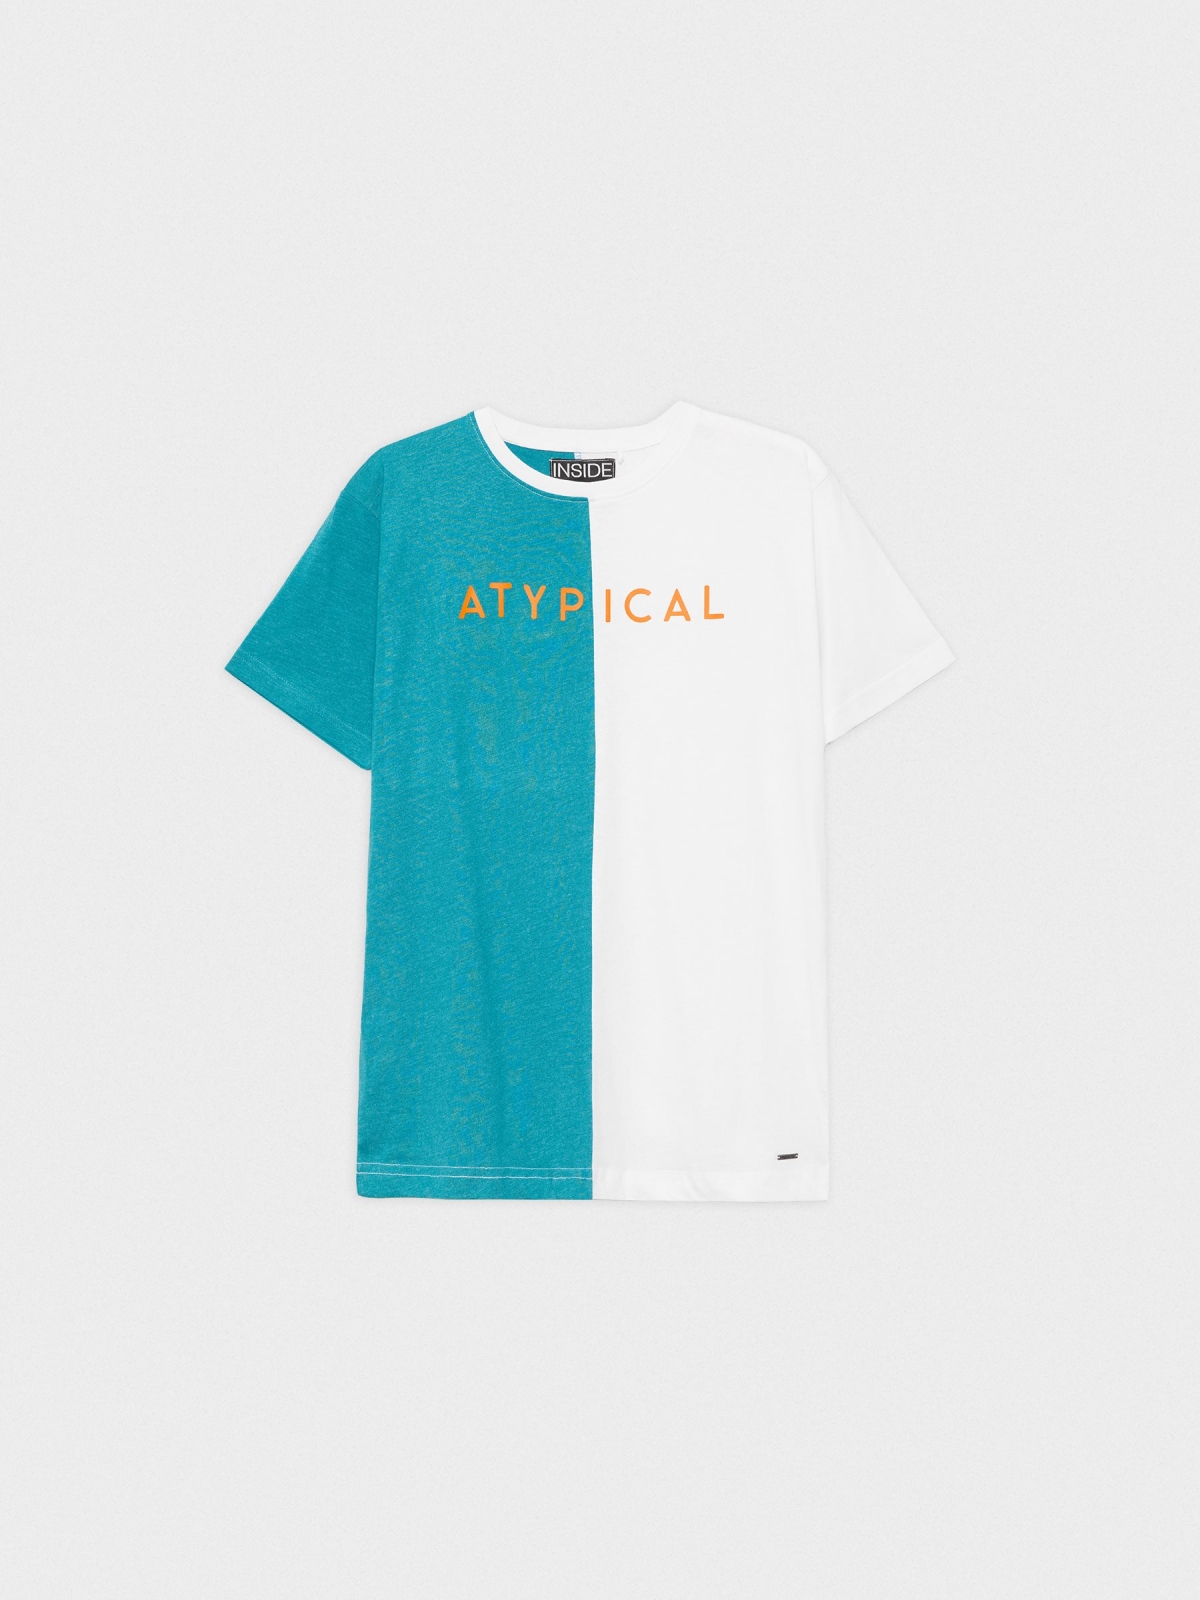  ATYPICAL T-shirt emerald